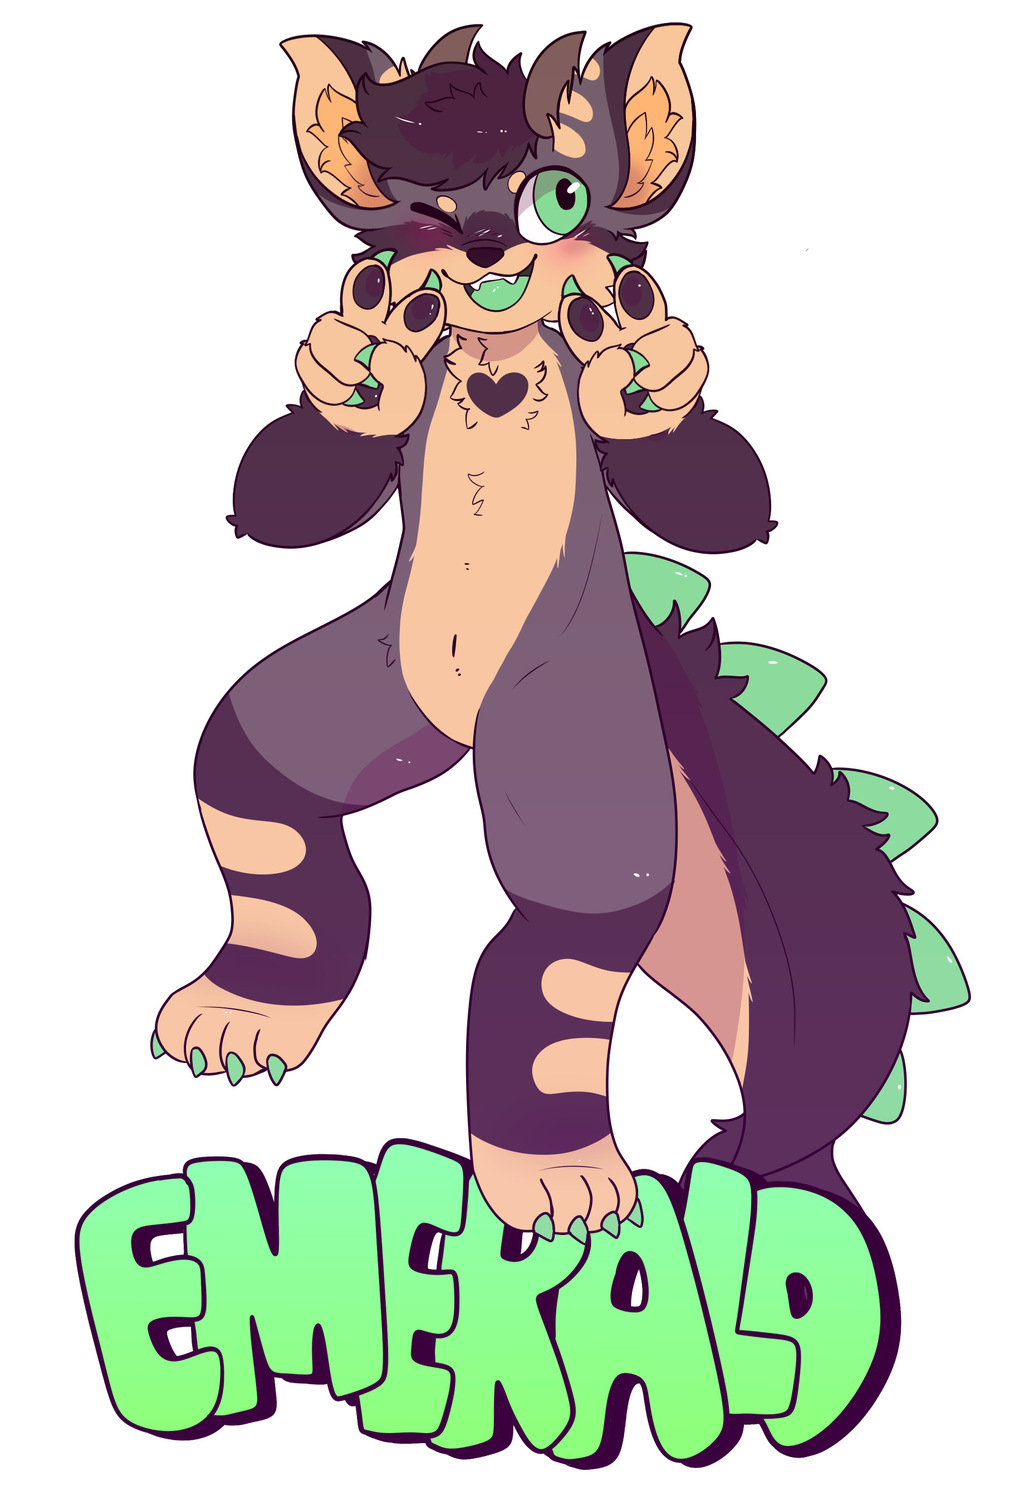 [C] Founded badge